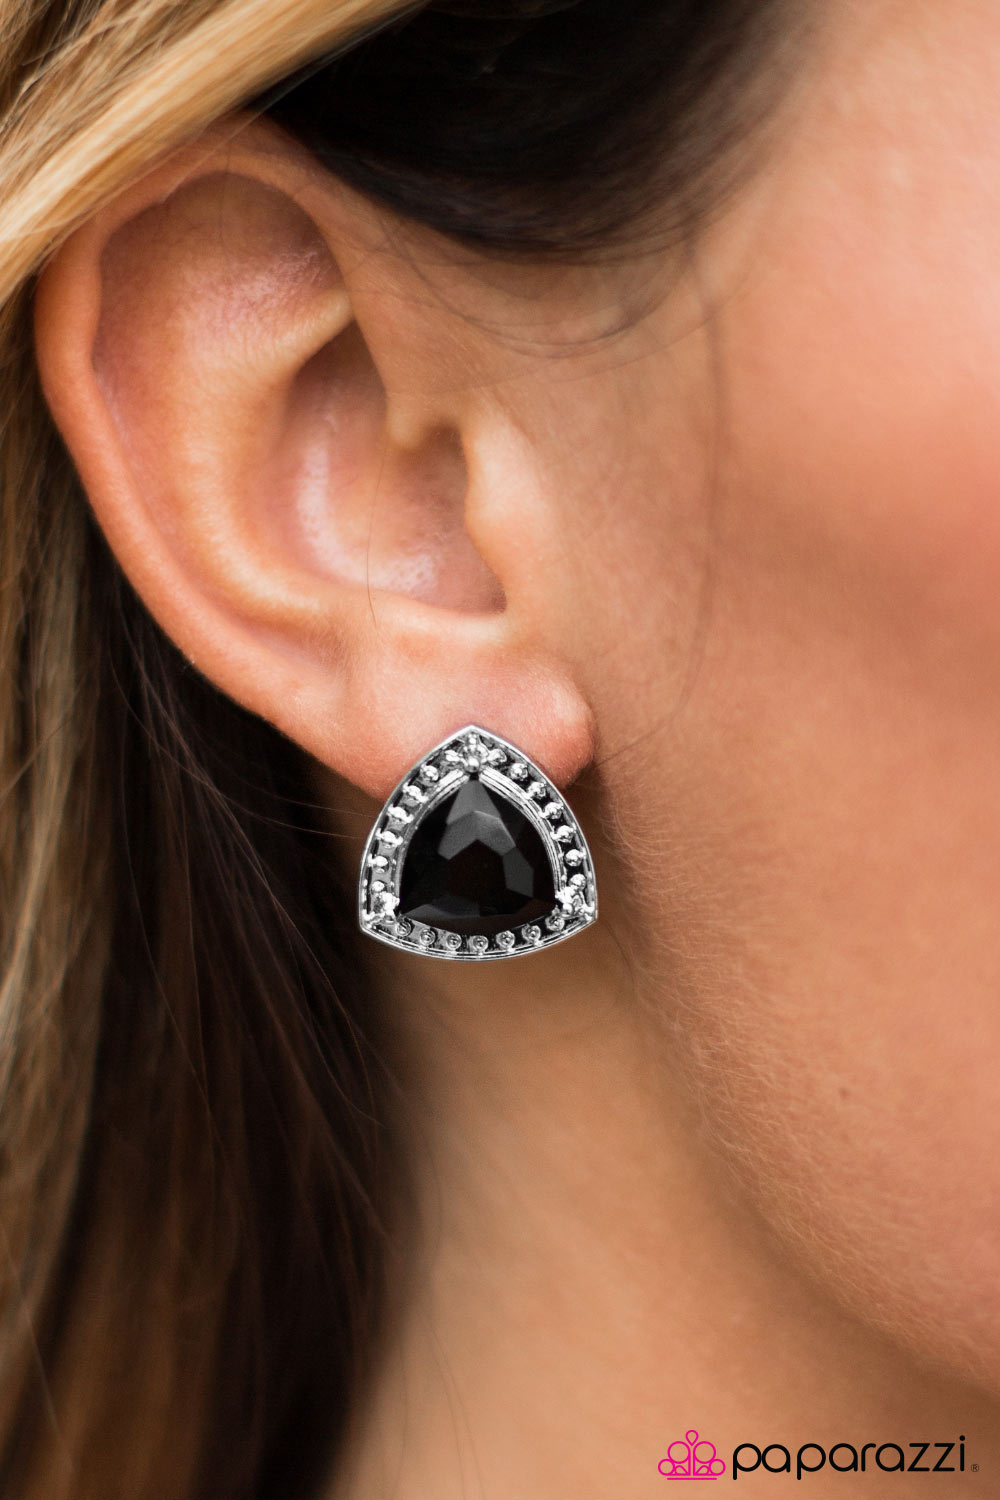 Its All About Etiquette - Black - Paparazzi earrings